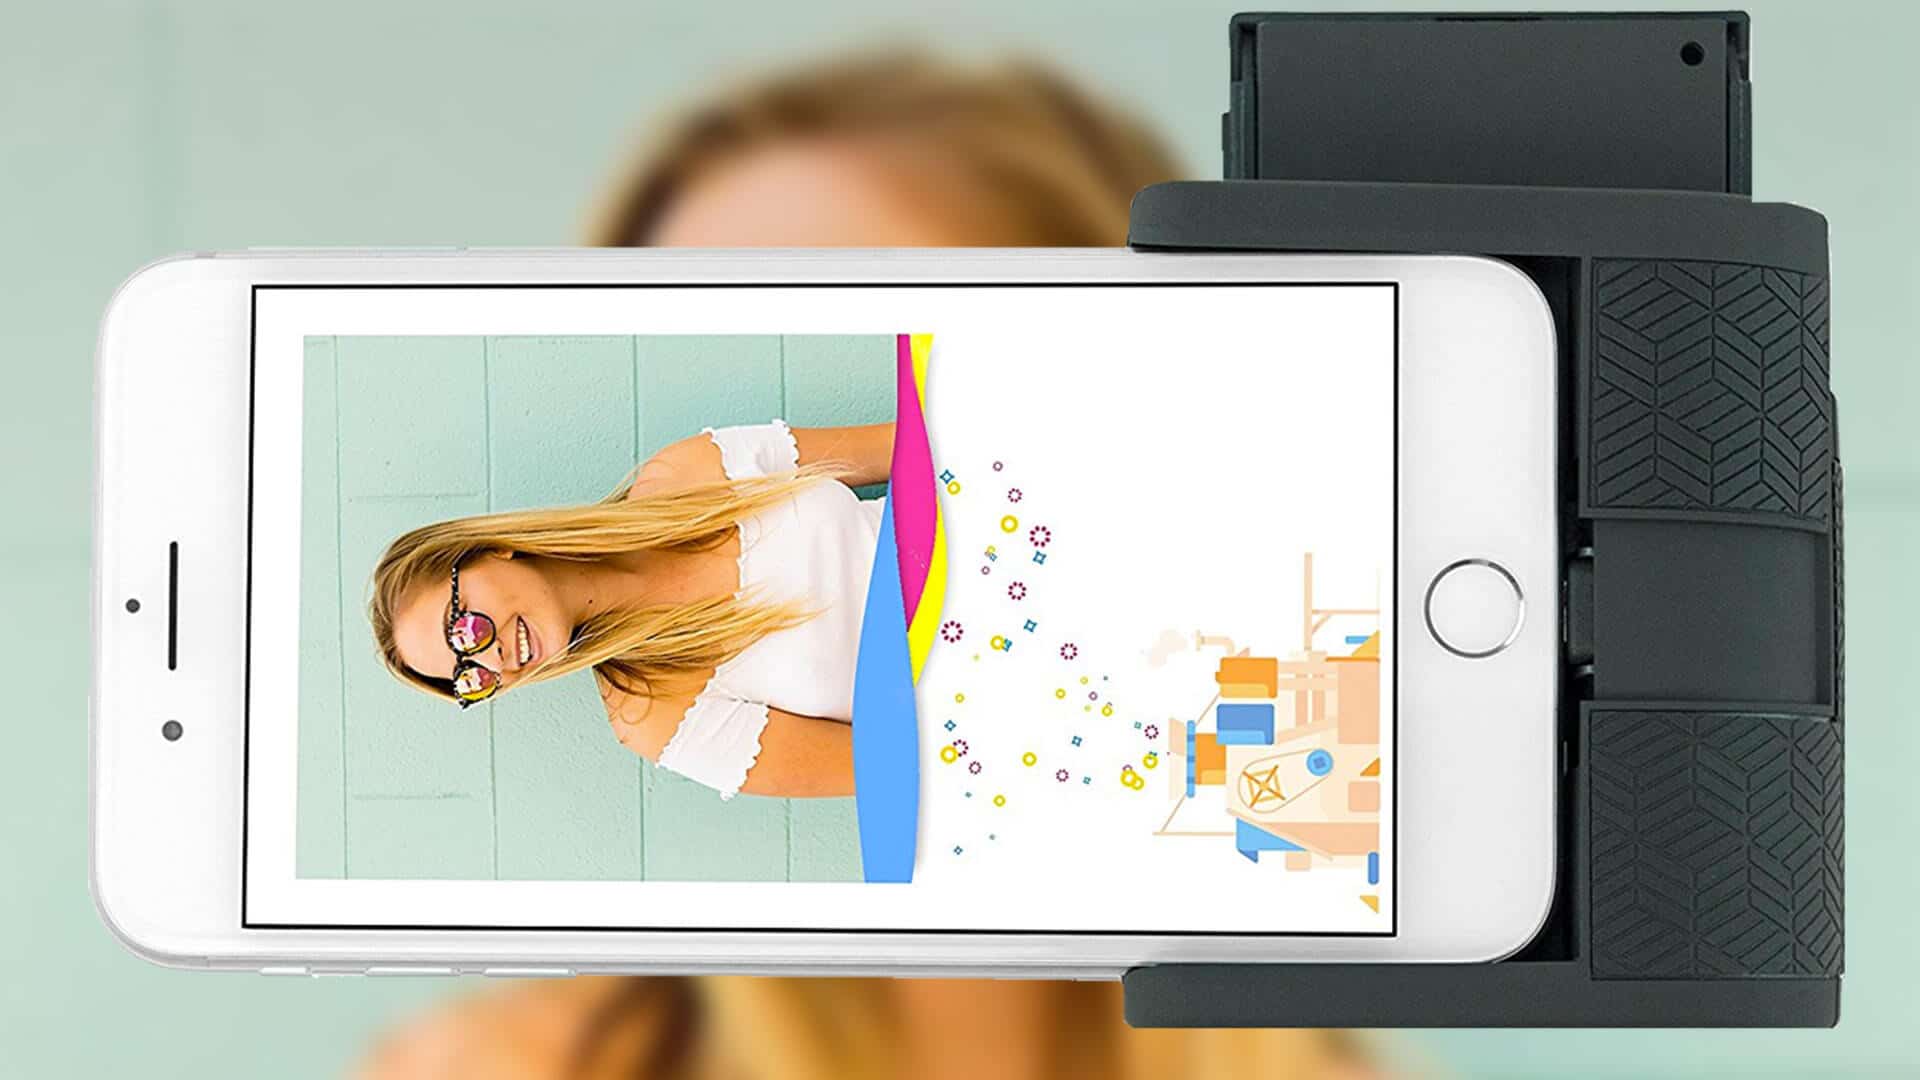 15 Best Augmented Reality Printer For Iphone for 2023